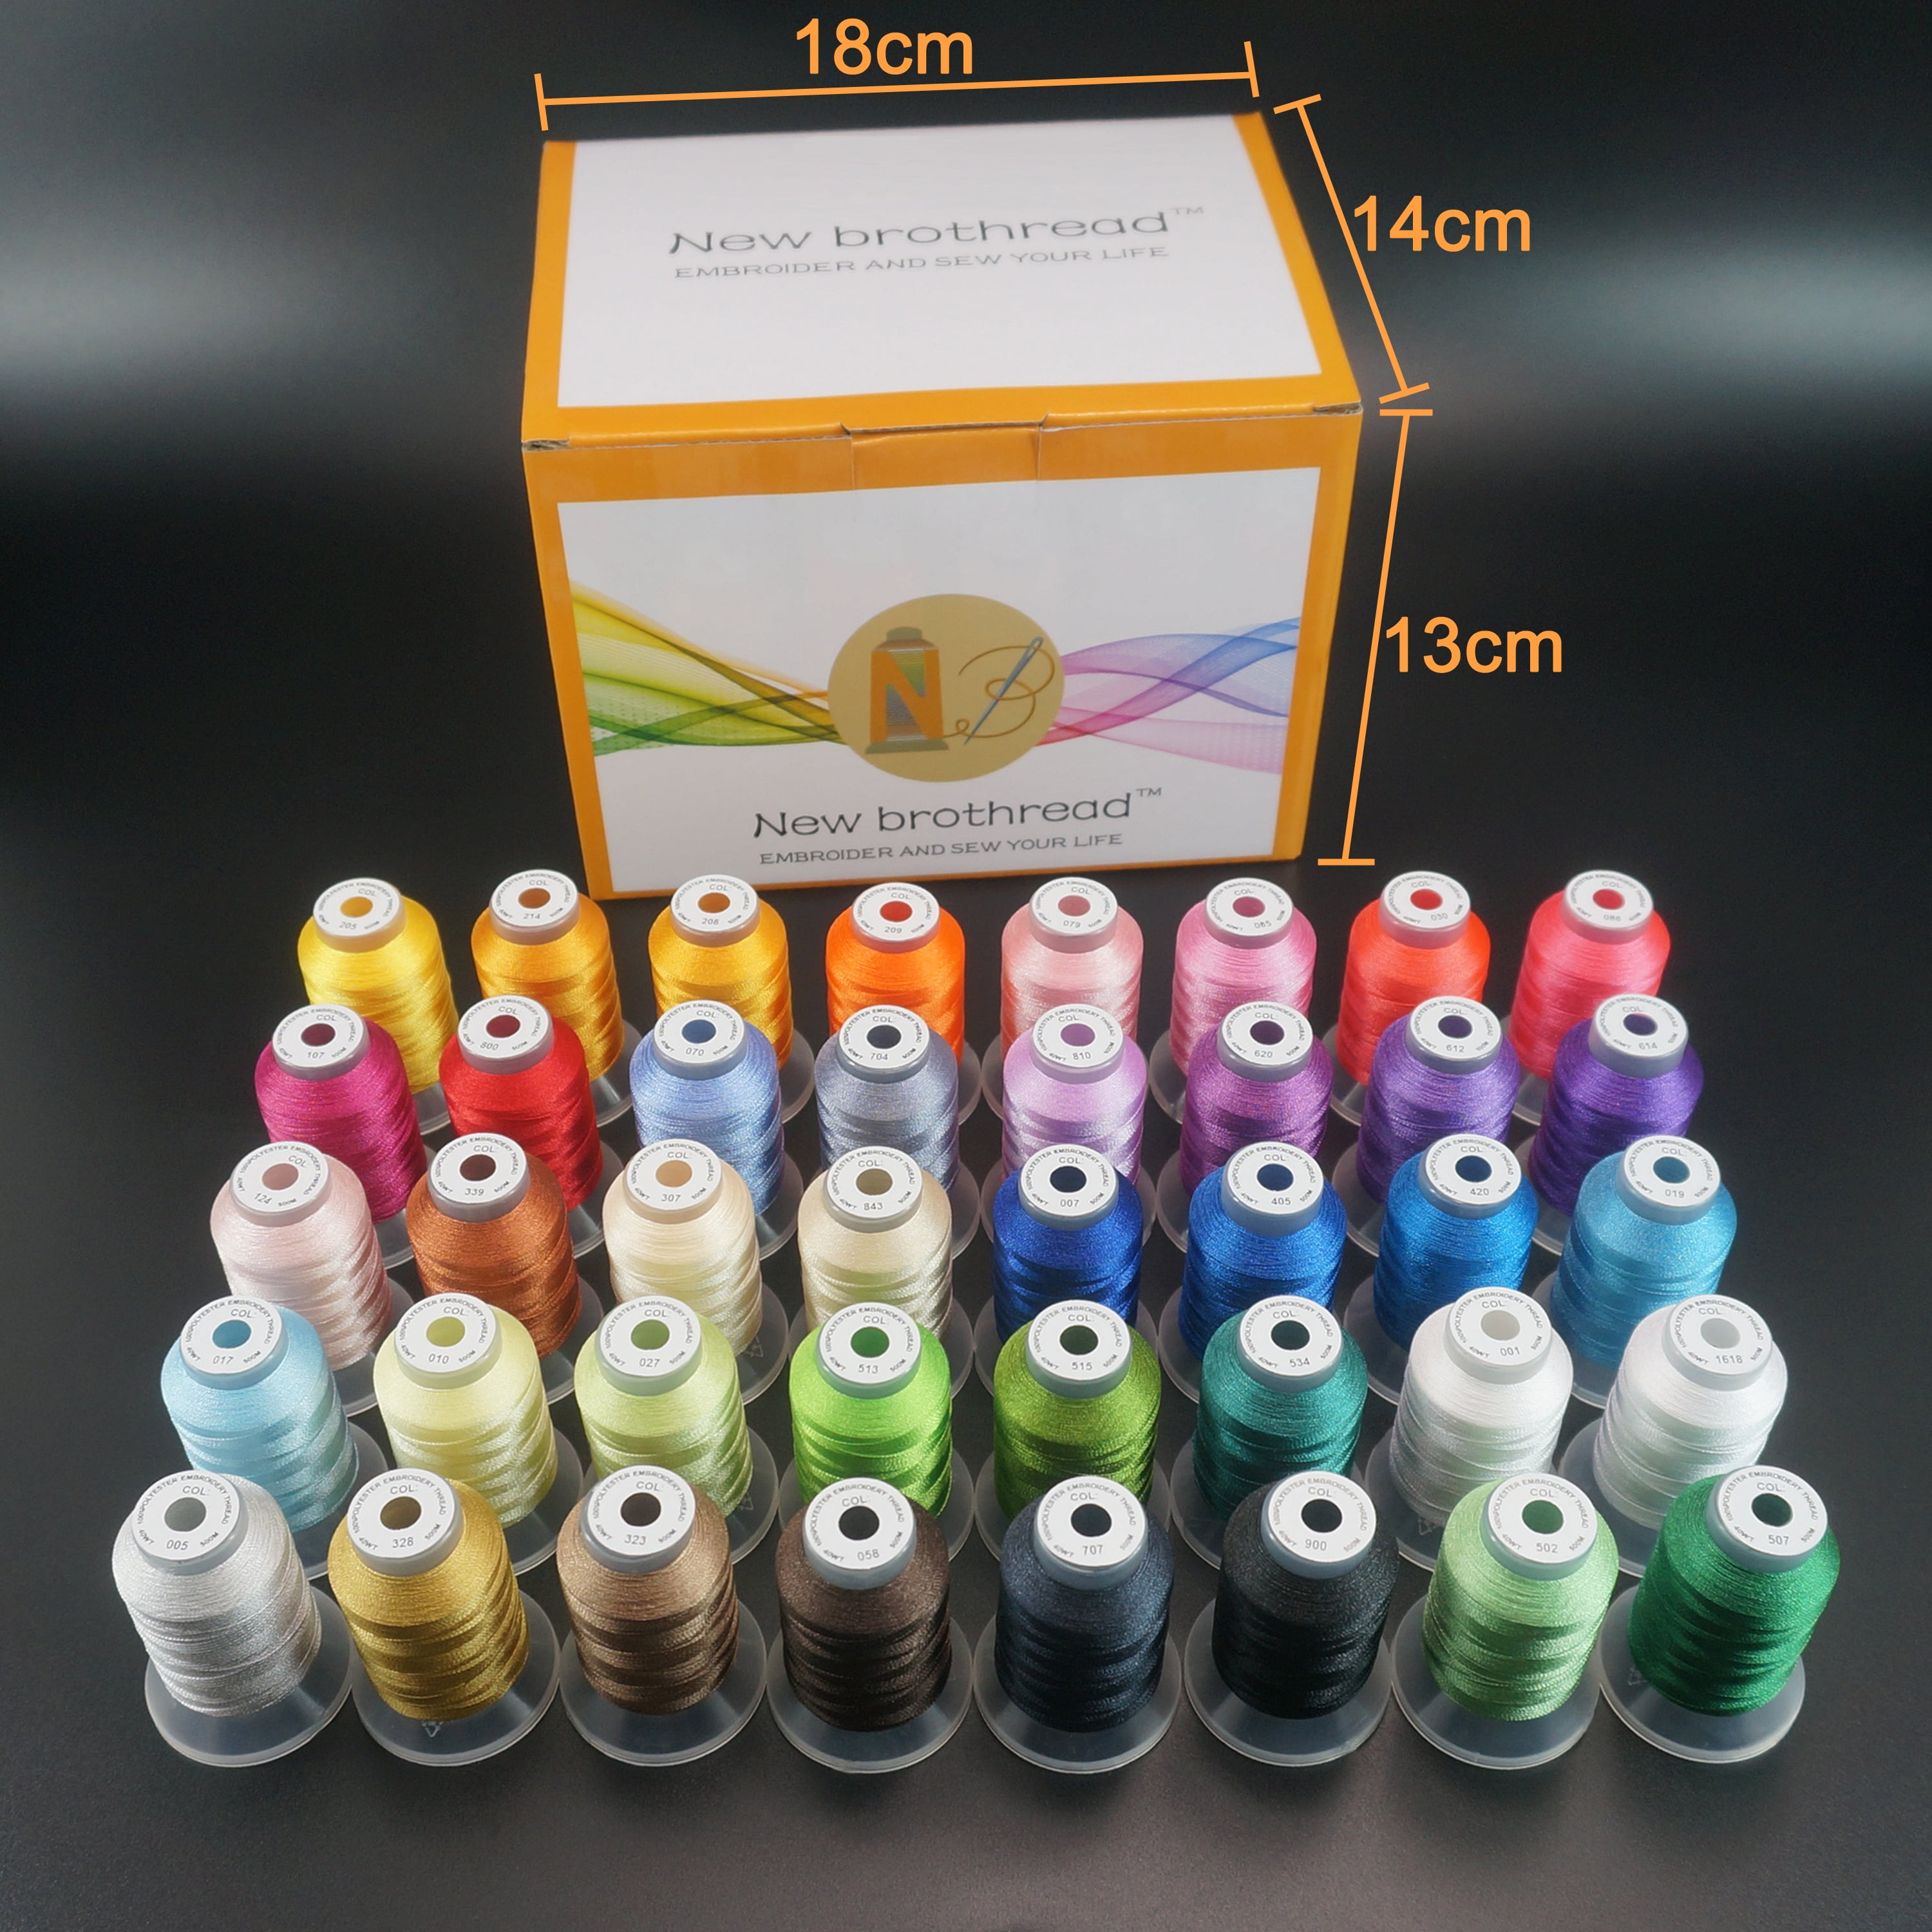 New brothread 63 Colours Polyester Machine Embroidery Thread Kit 500M  (550Y) each Spool